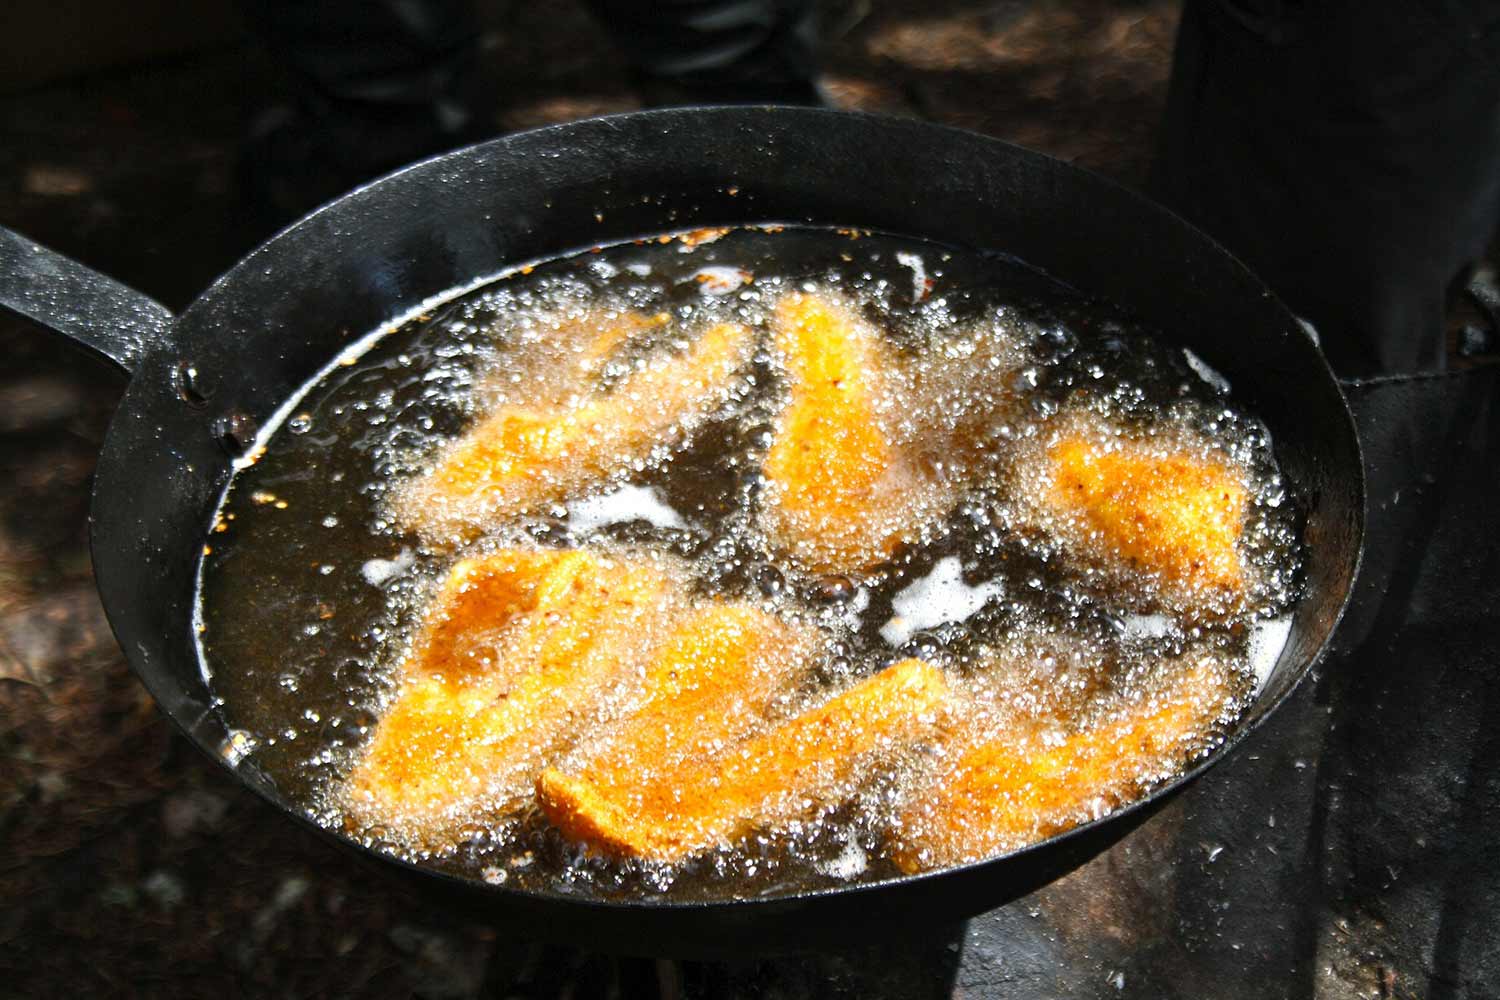 Fried walleye is a classic dish wherever they are caught.